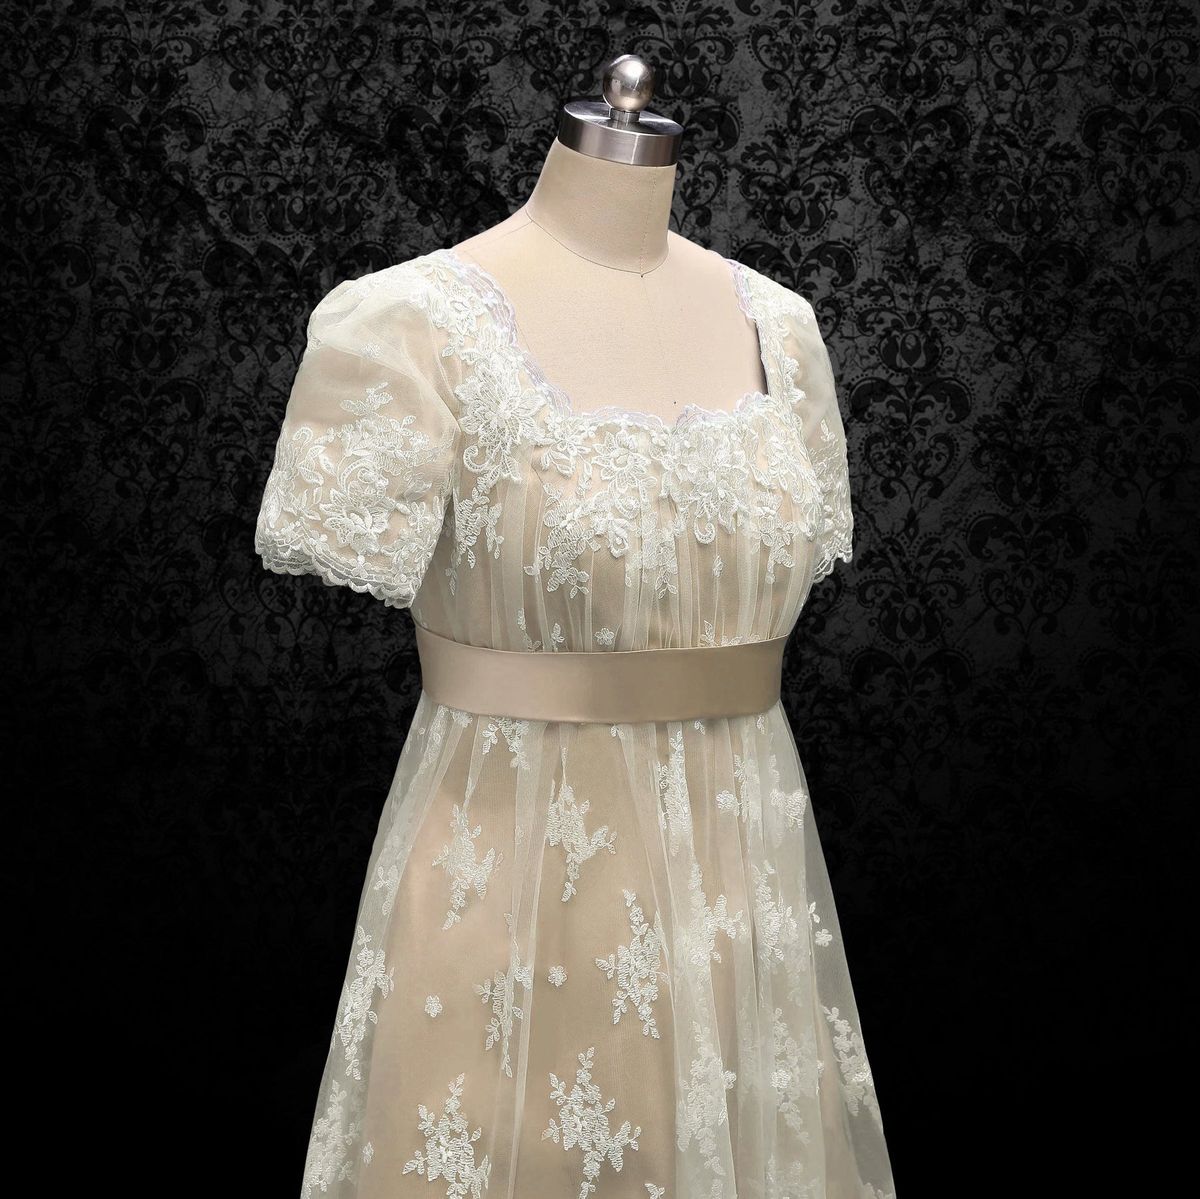 Wonderland By Lilian Plus Size 24 Prom Lace Nude A-line Dress on Queenly